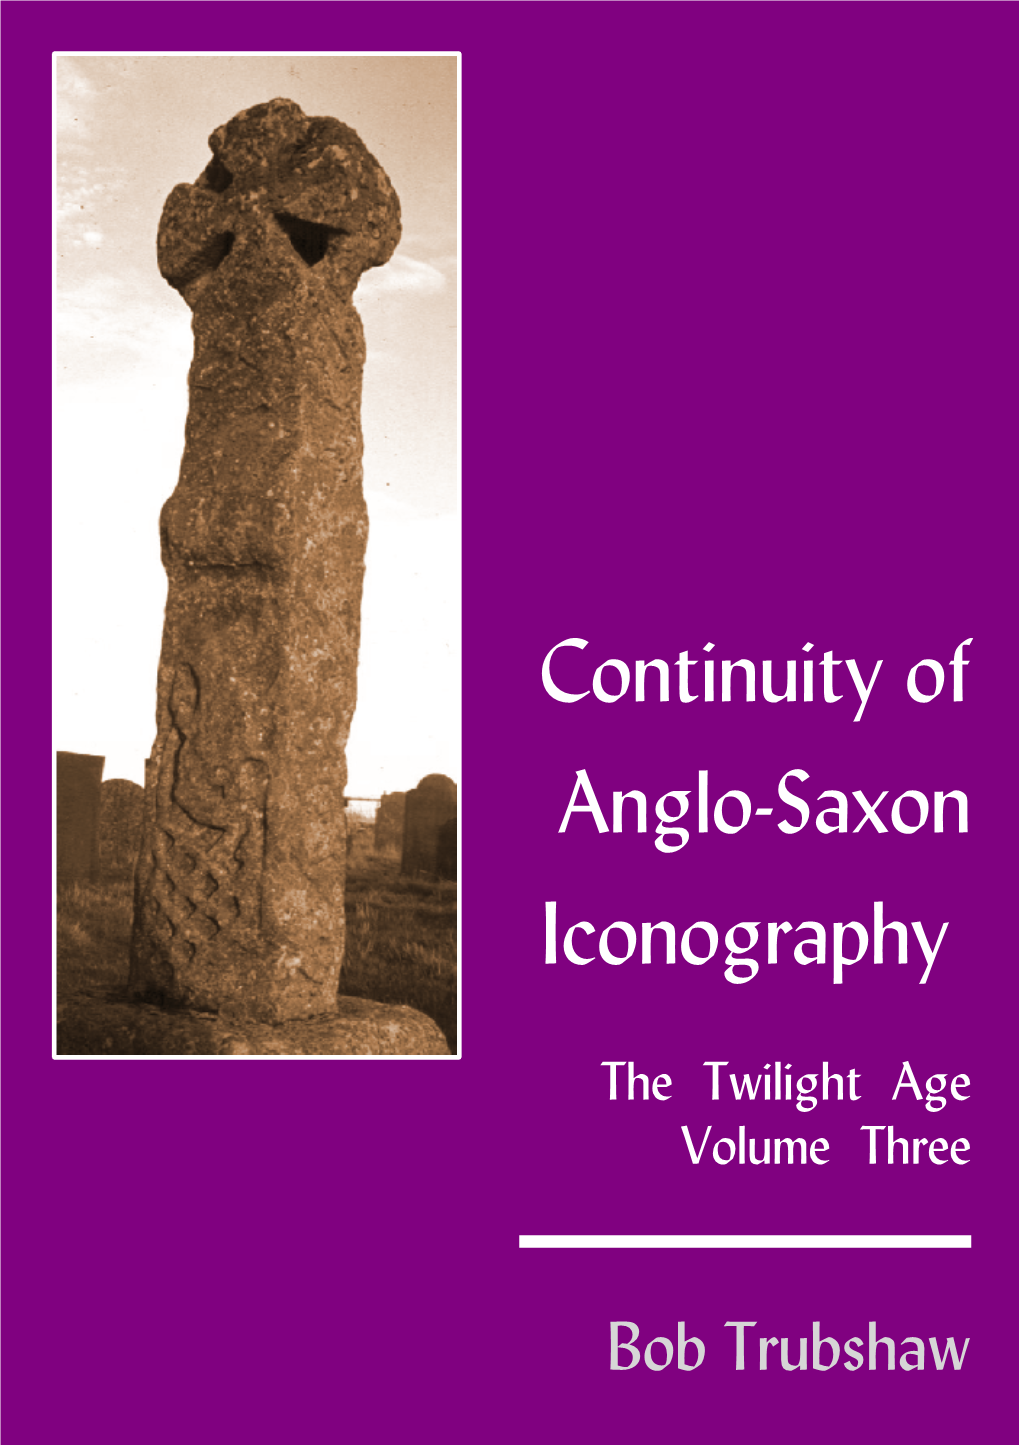 Download Continuity of Anglo-Saxon Iconography for FREE